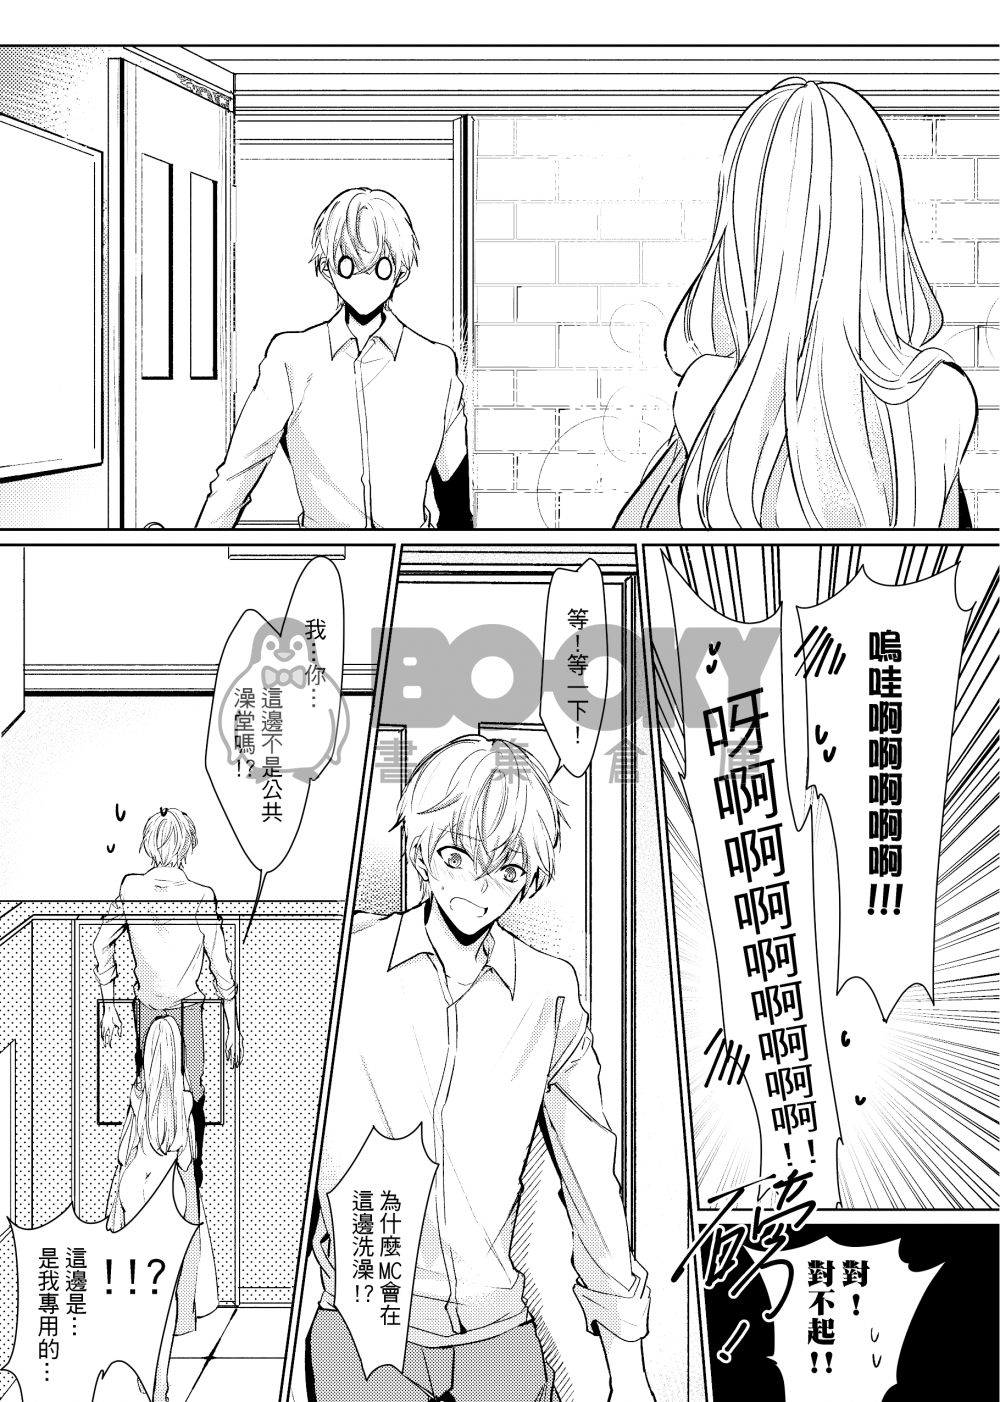 Ray!Let’s take a bath together? 試閱圖片